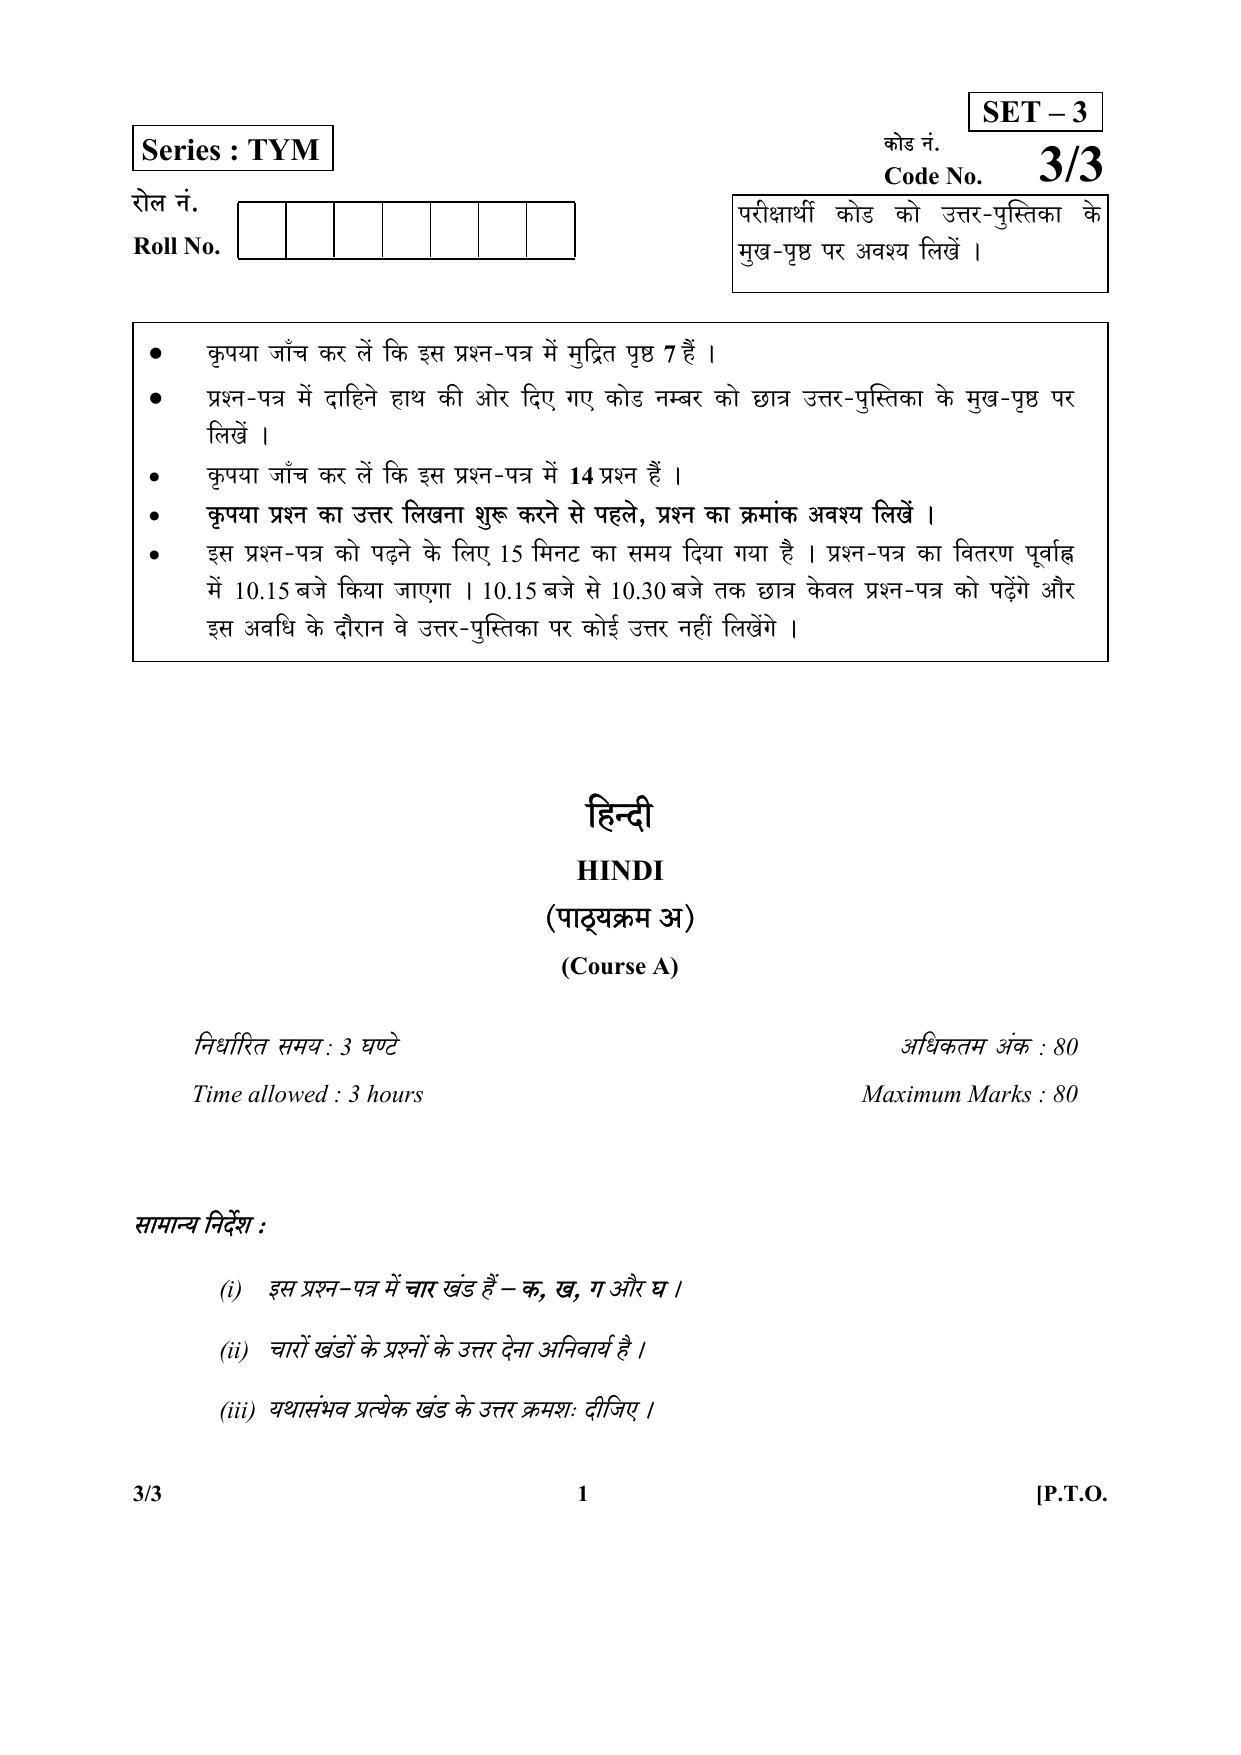 CBSE Class 10 3-3_Hindi SET-3 2018 Question Paper - Page 1